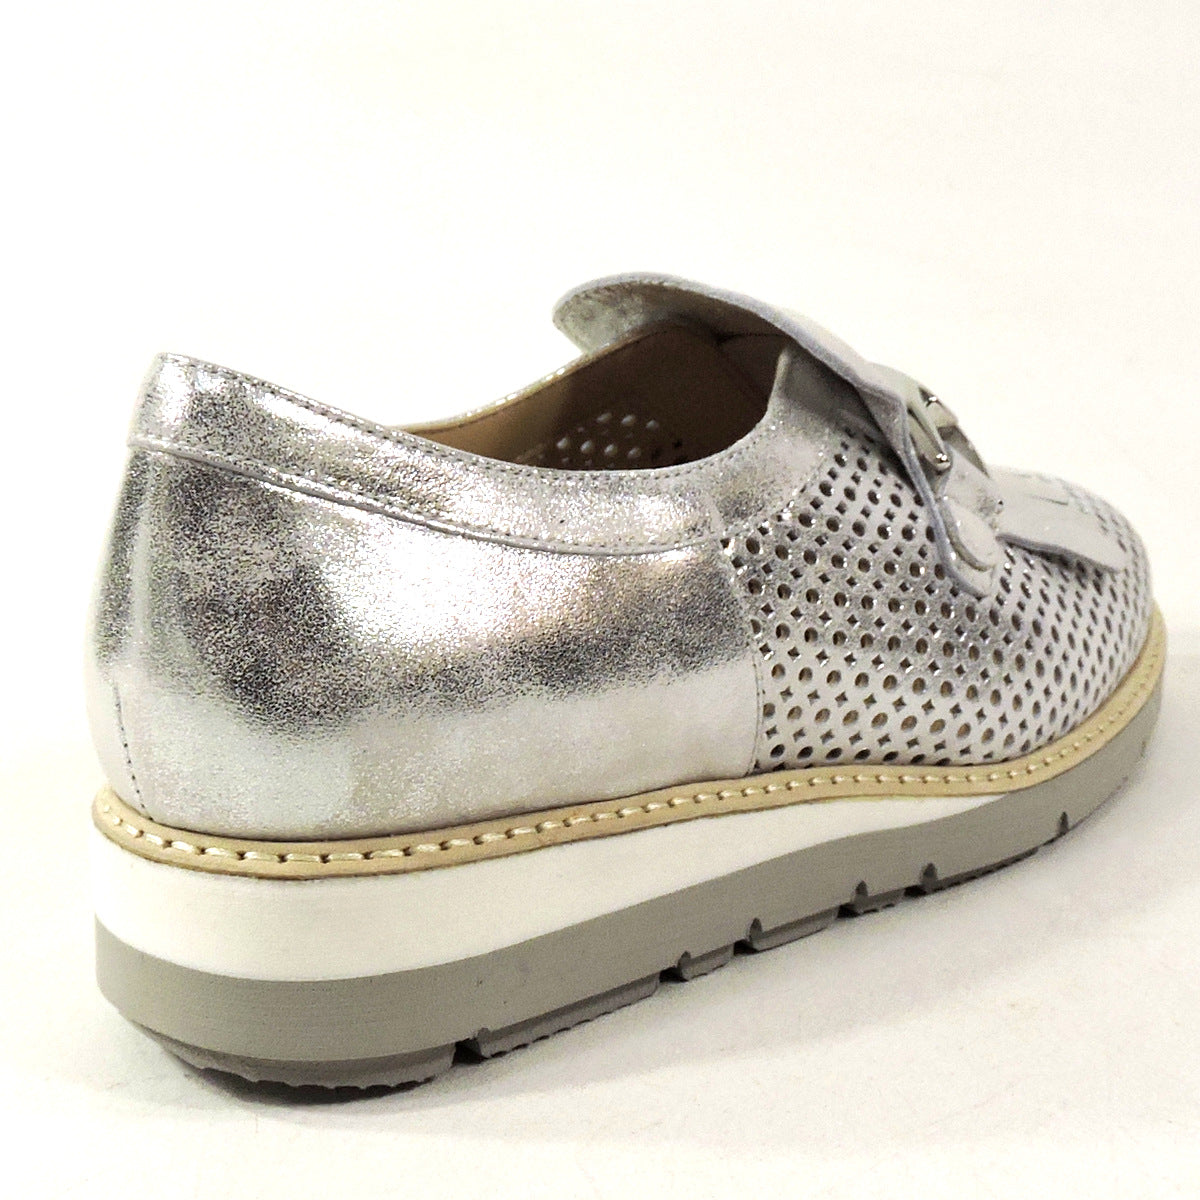 DONNA SOFT 🇮🇹WOMEN'S SILVER SOFT LEATHER COMFORT SUMMER LOAFERS